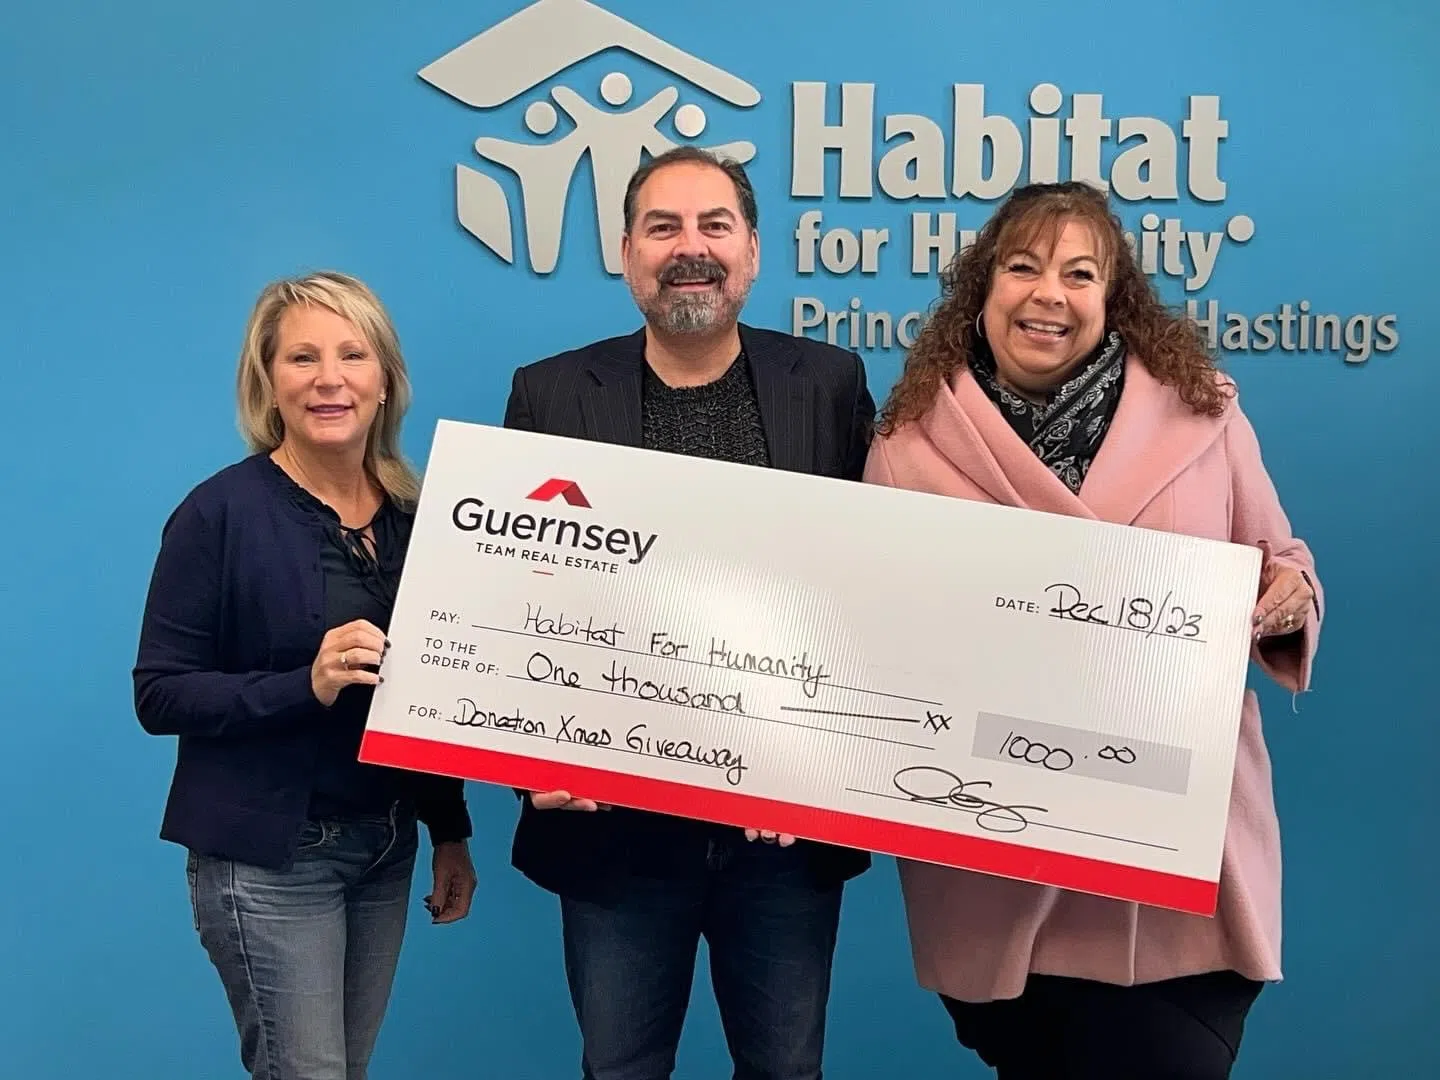 Four local charities, including Habitat for Humanity, recipients of local realtor charity giveaway